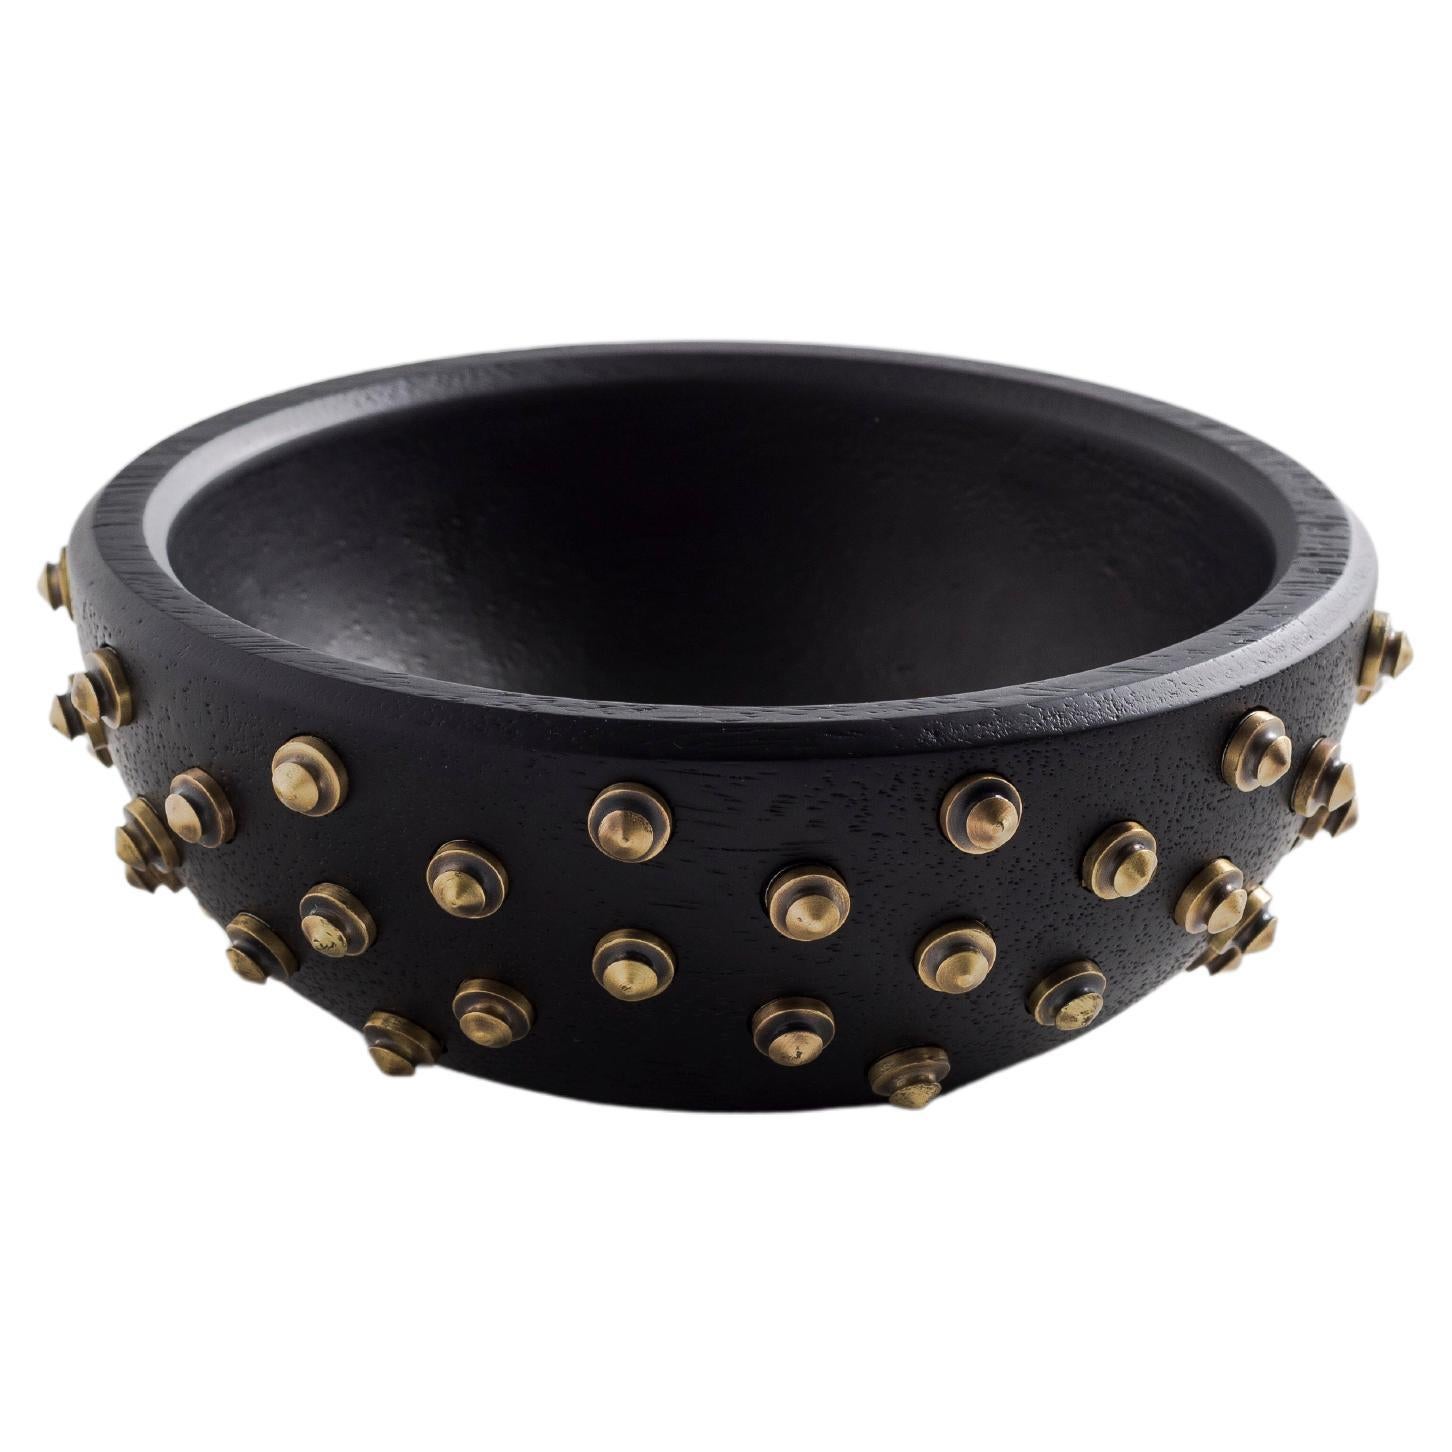 SITIERA Decorative Wood Bowl with Bronze Details by ANDEAN, In Stock